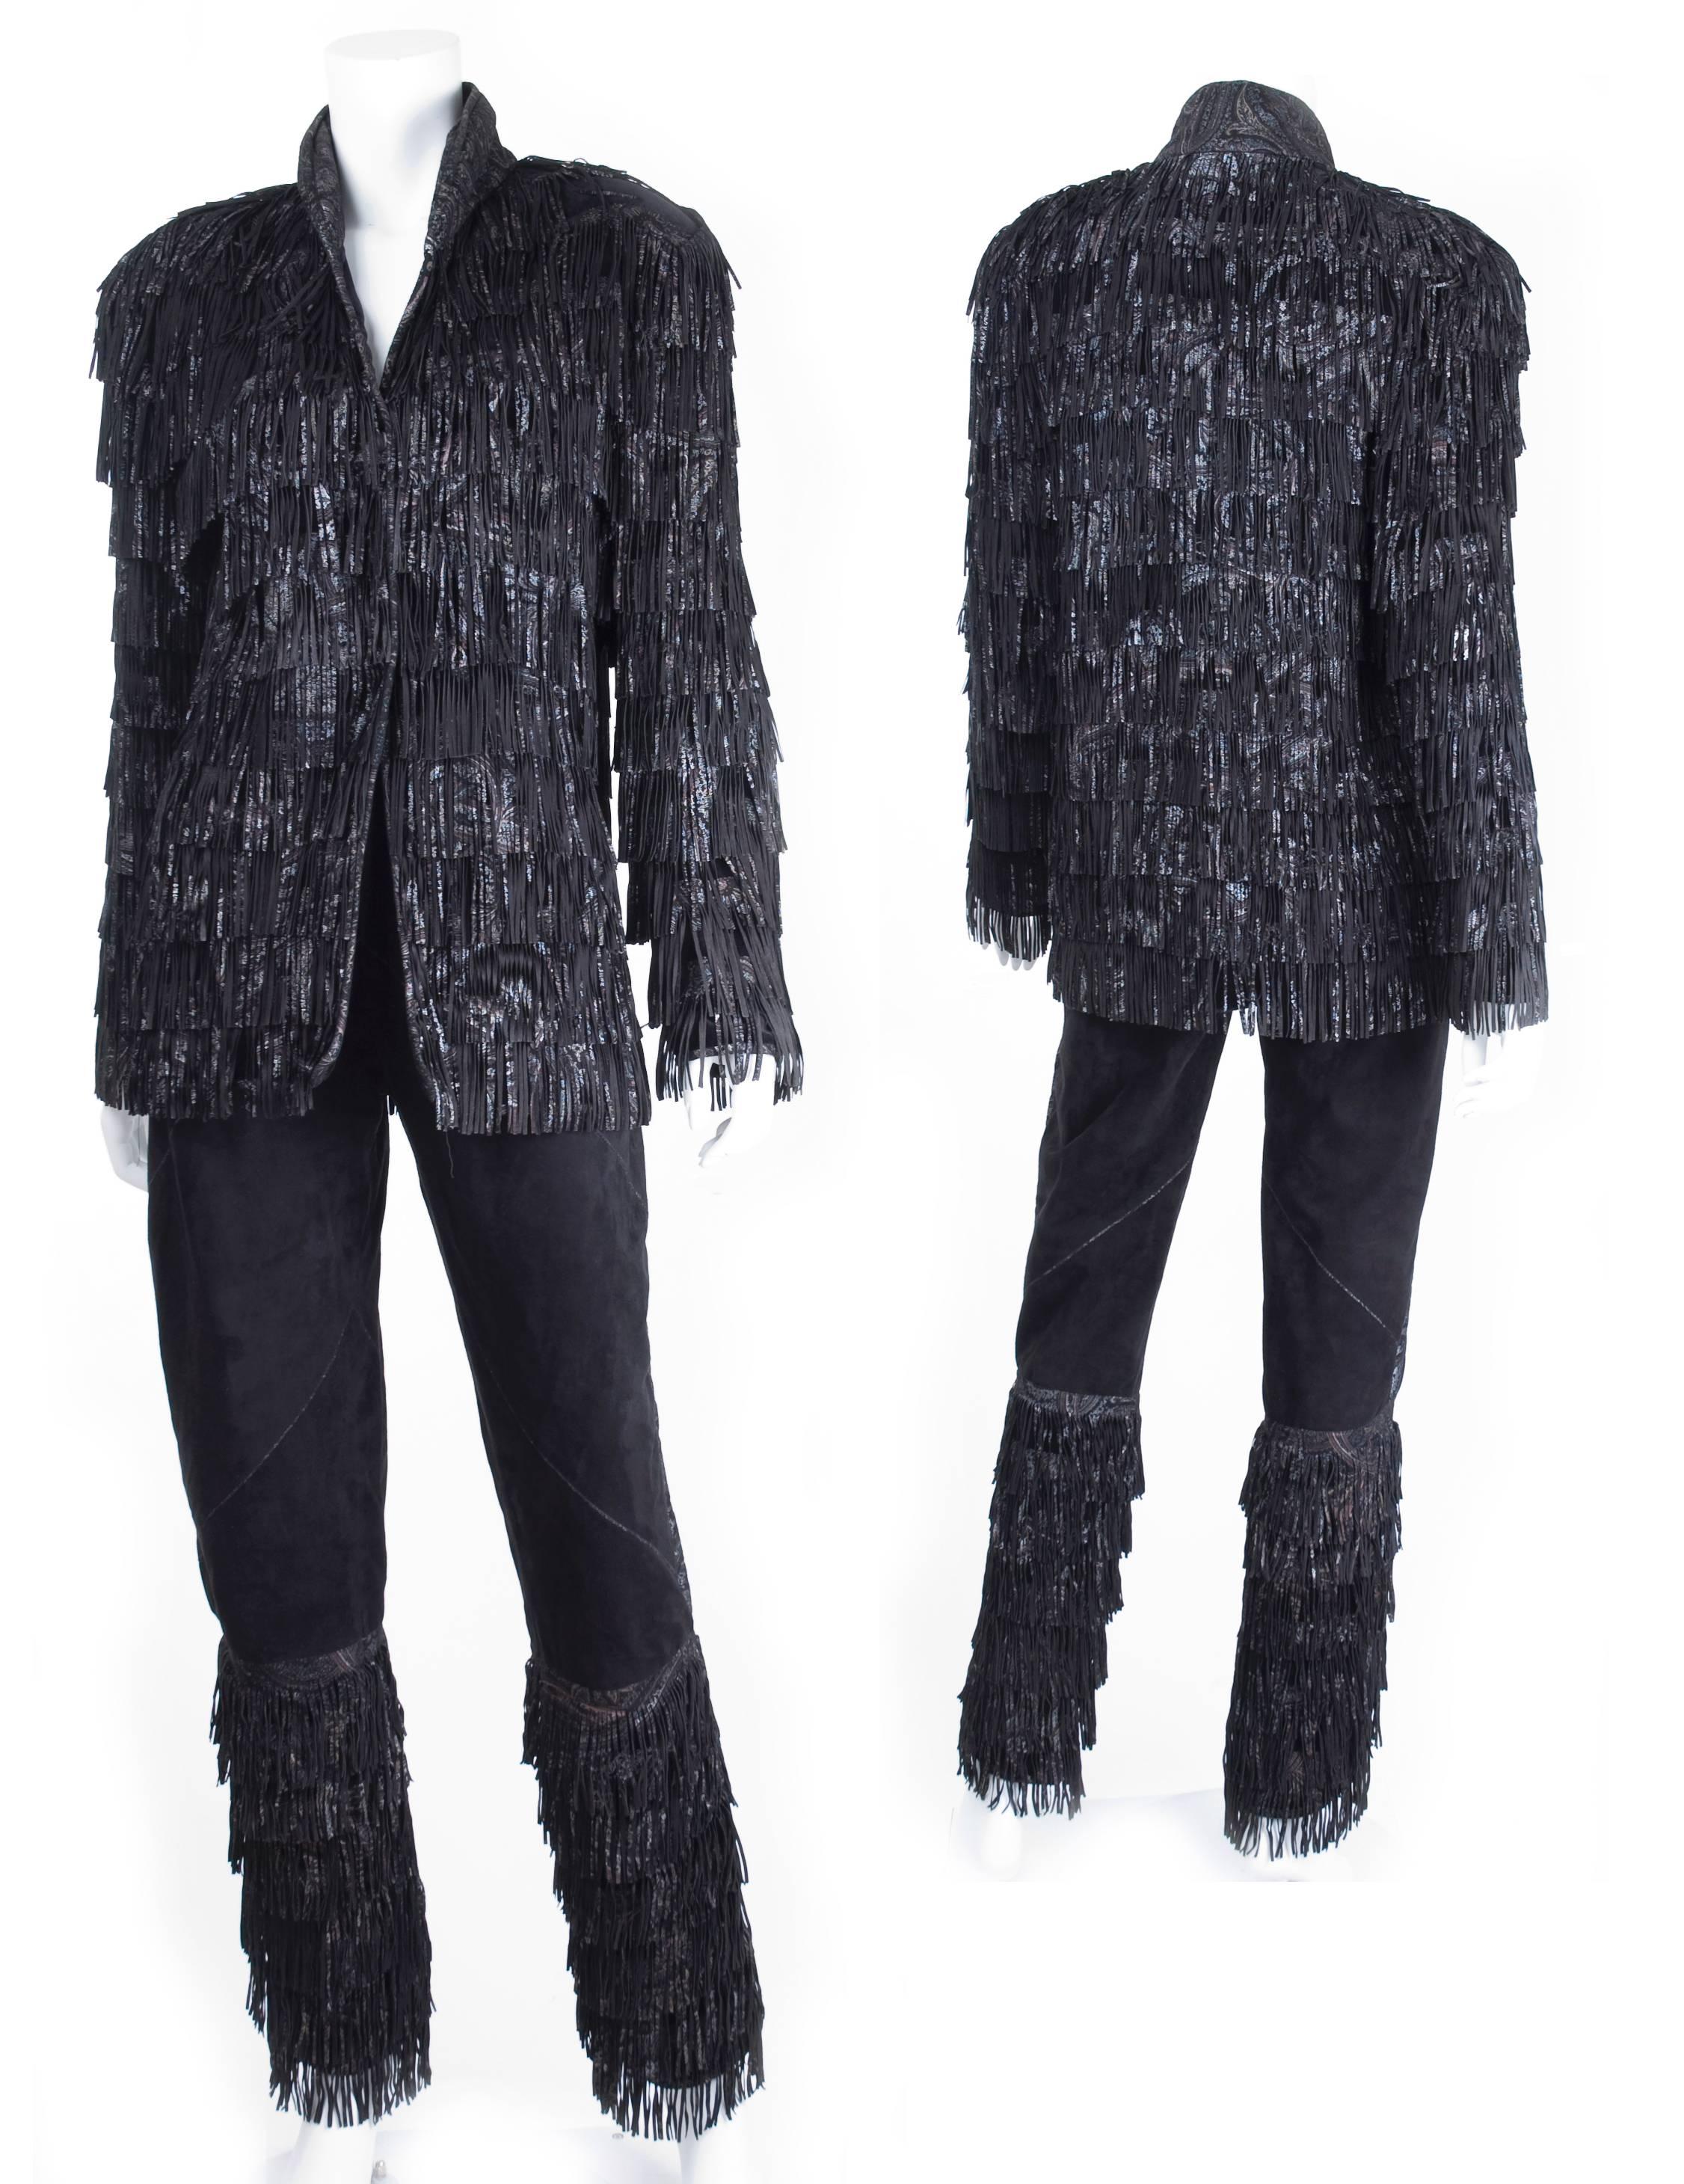 1980s Roberto Cavalli suede suit with fringes. All painted suede fringes are sawn on to a cotton material. The pants are suede leather to knee height and lined.
The Leather is painted in silver, pink and grey.
The suit was once worn to an event